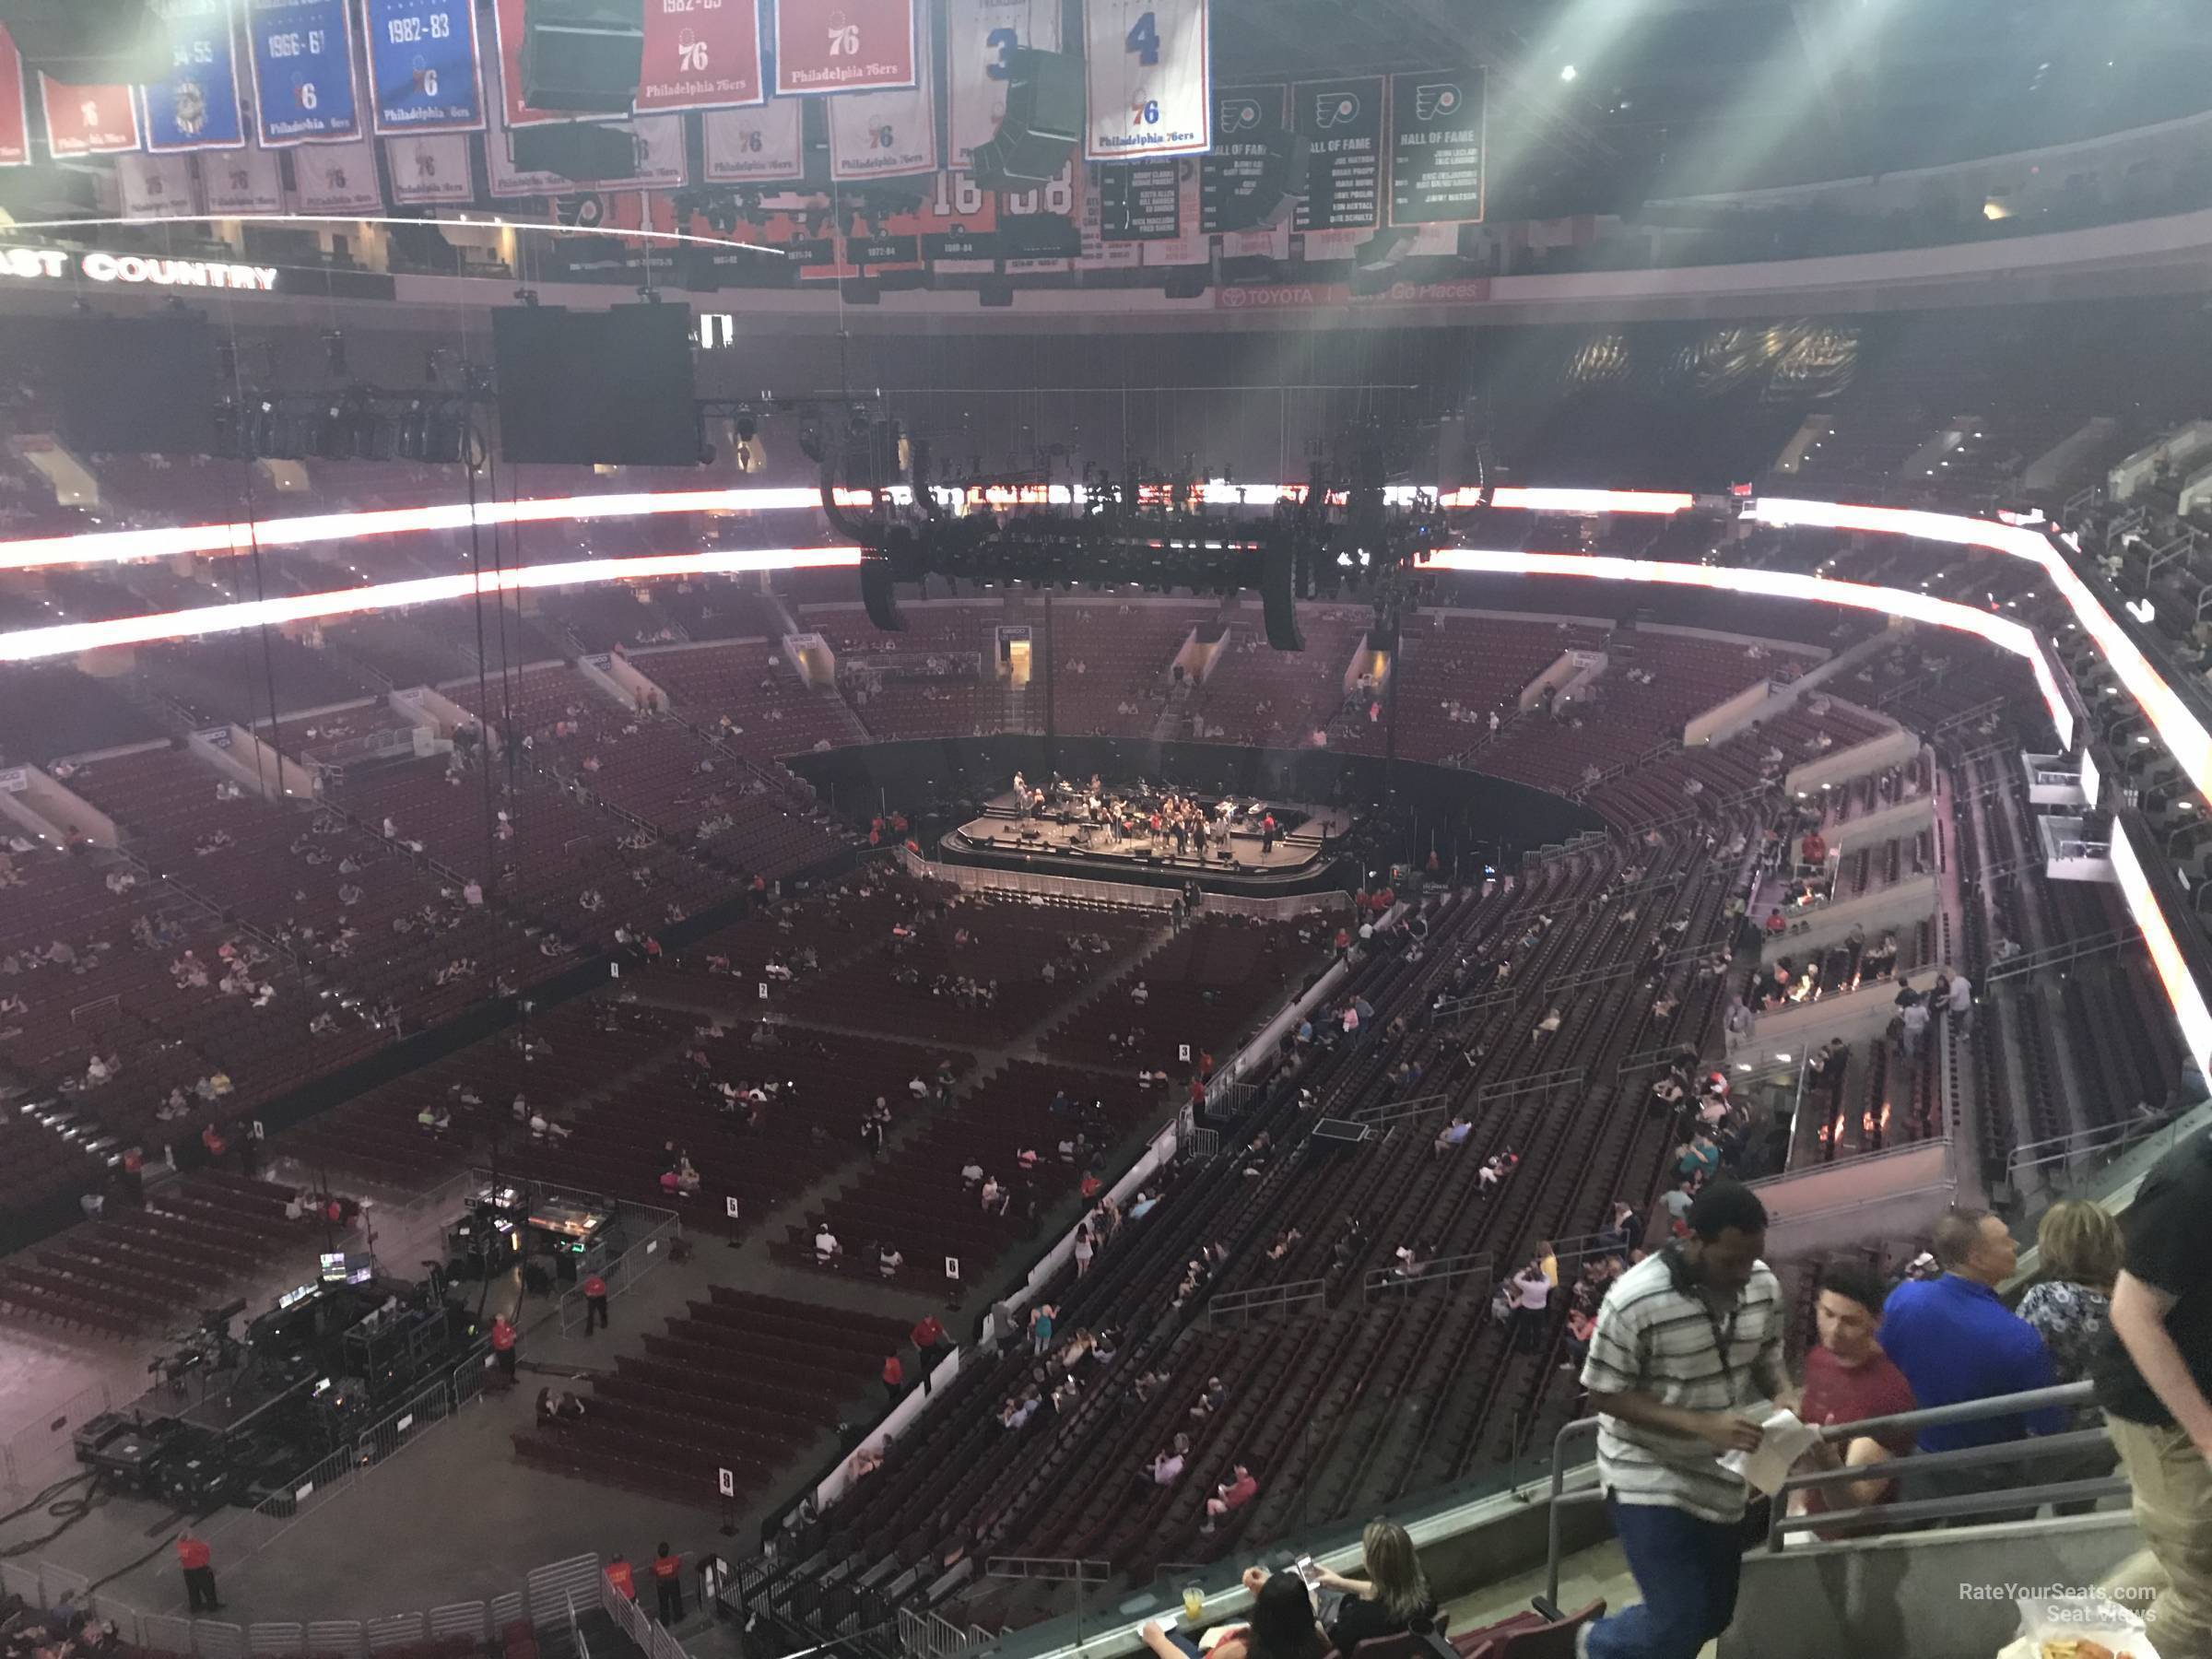 section 209a, row 7 seat view  for concert - wells fargo center